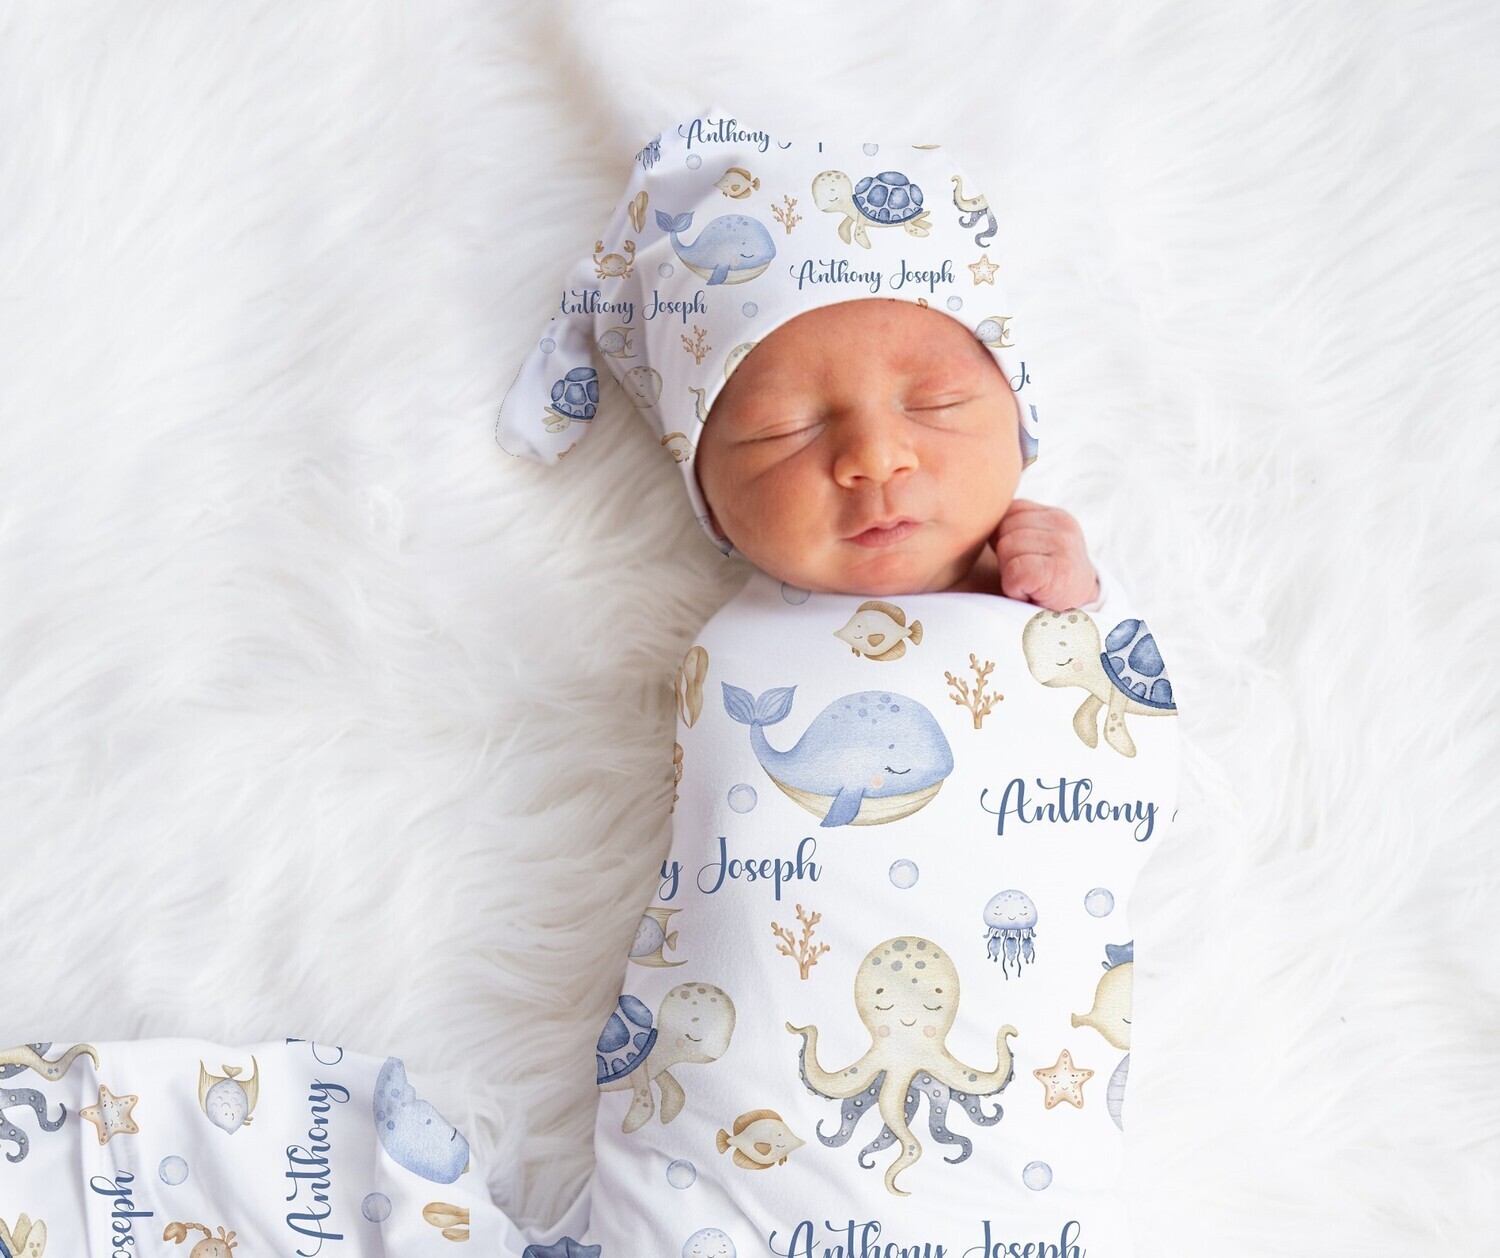 Under The Sea Creatures Personalized Baby Boy Swaddle Blanket Newborn Swaddle Blanket Knotted Baby Cap Headband Baby Gift Hospital Photo Newborn Photo Newborn Blanket